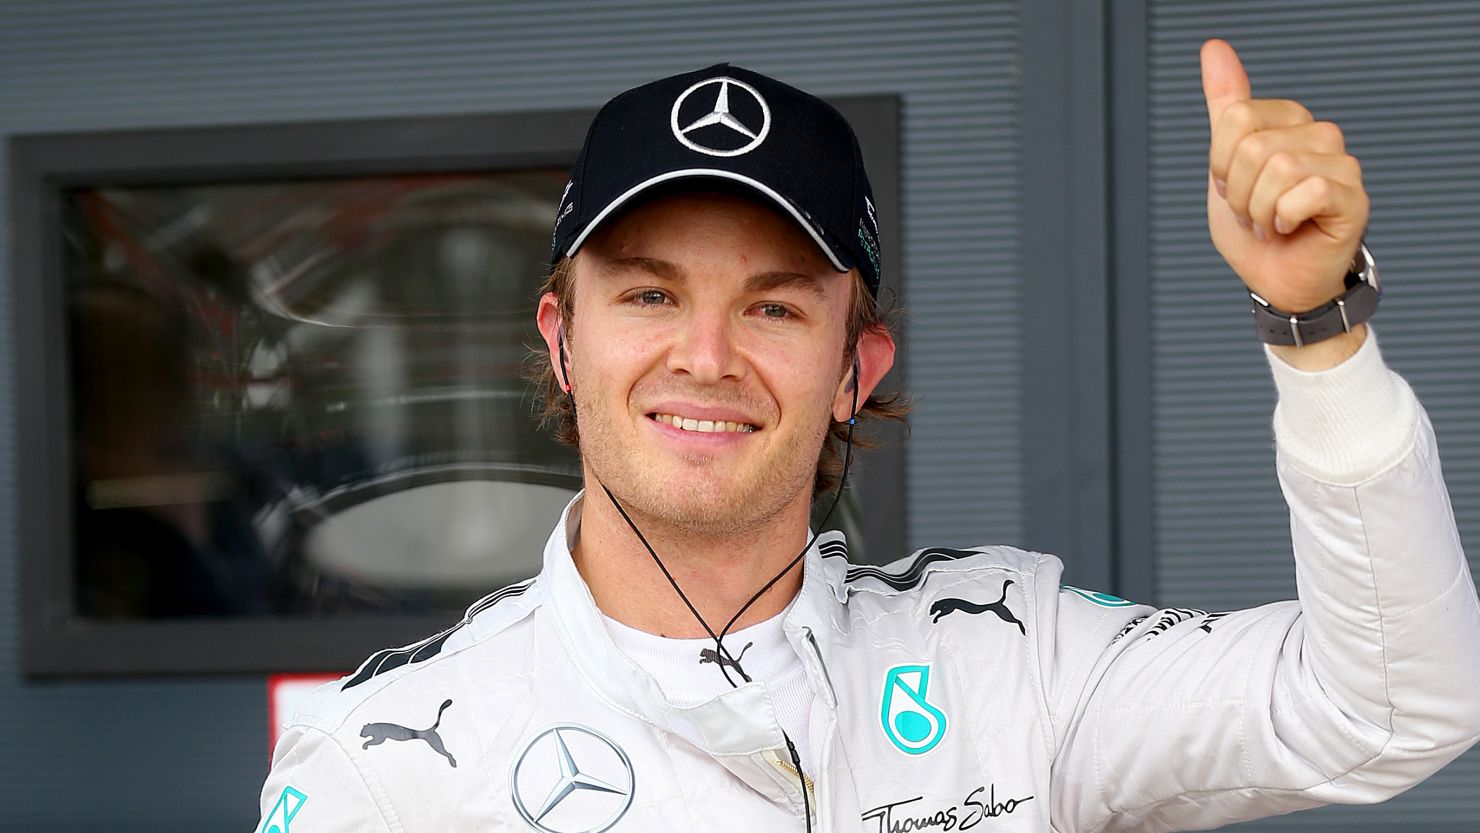 Life's good for Nico Rosberg after a wedding and now a new contract with the Mercedes F1 team.